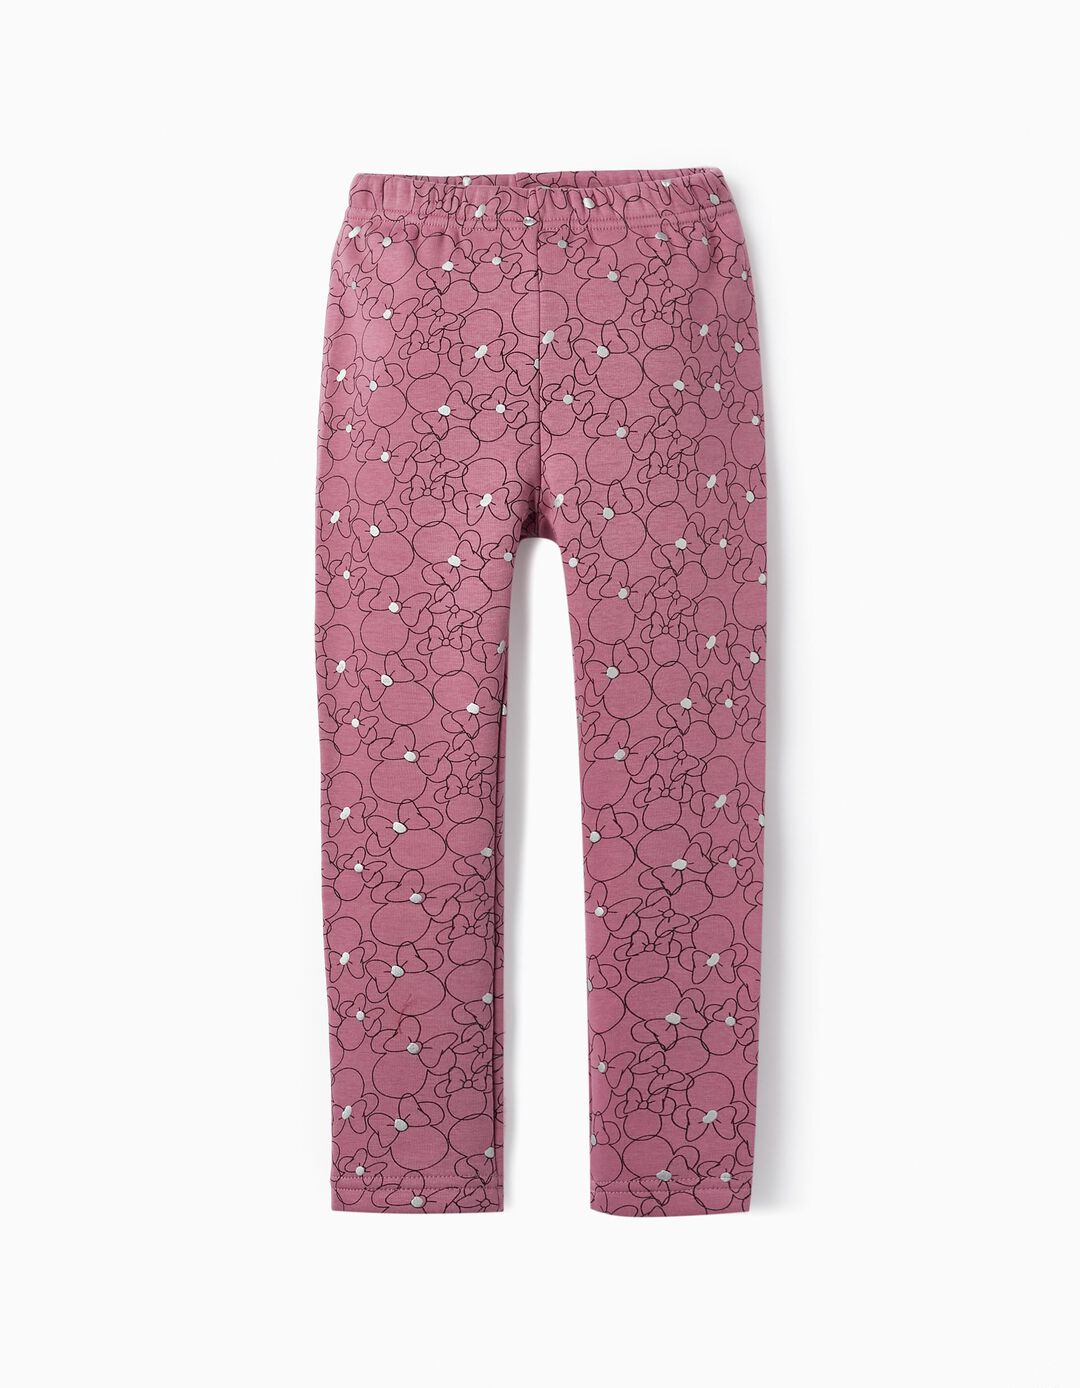 Thermal Leggings for Girls 'Minnie', Pink